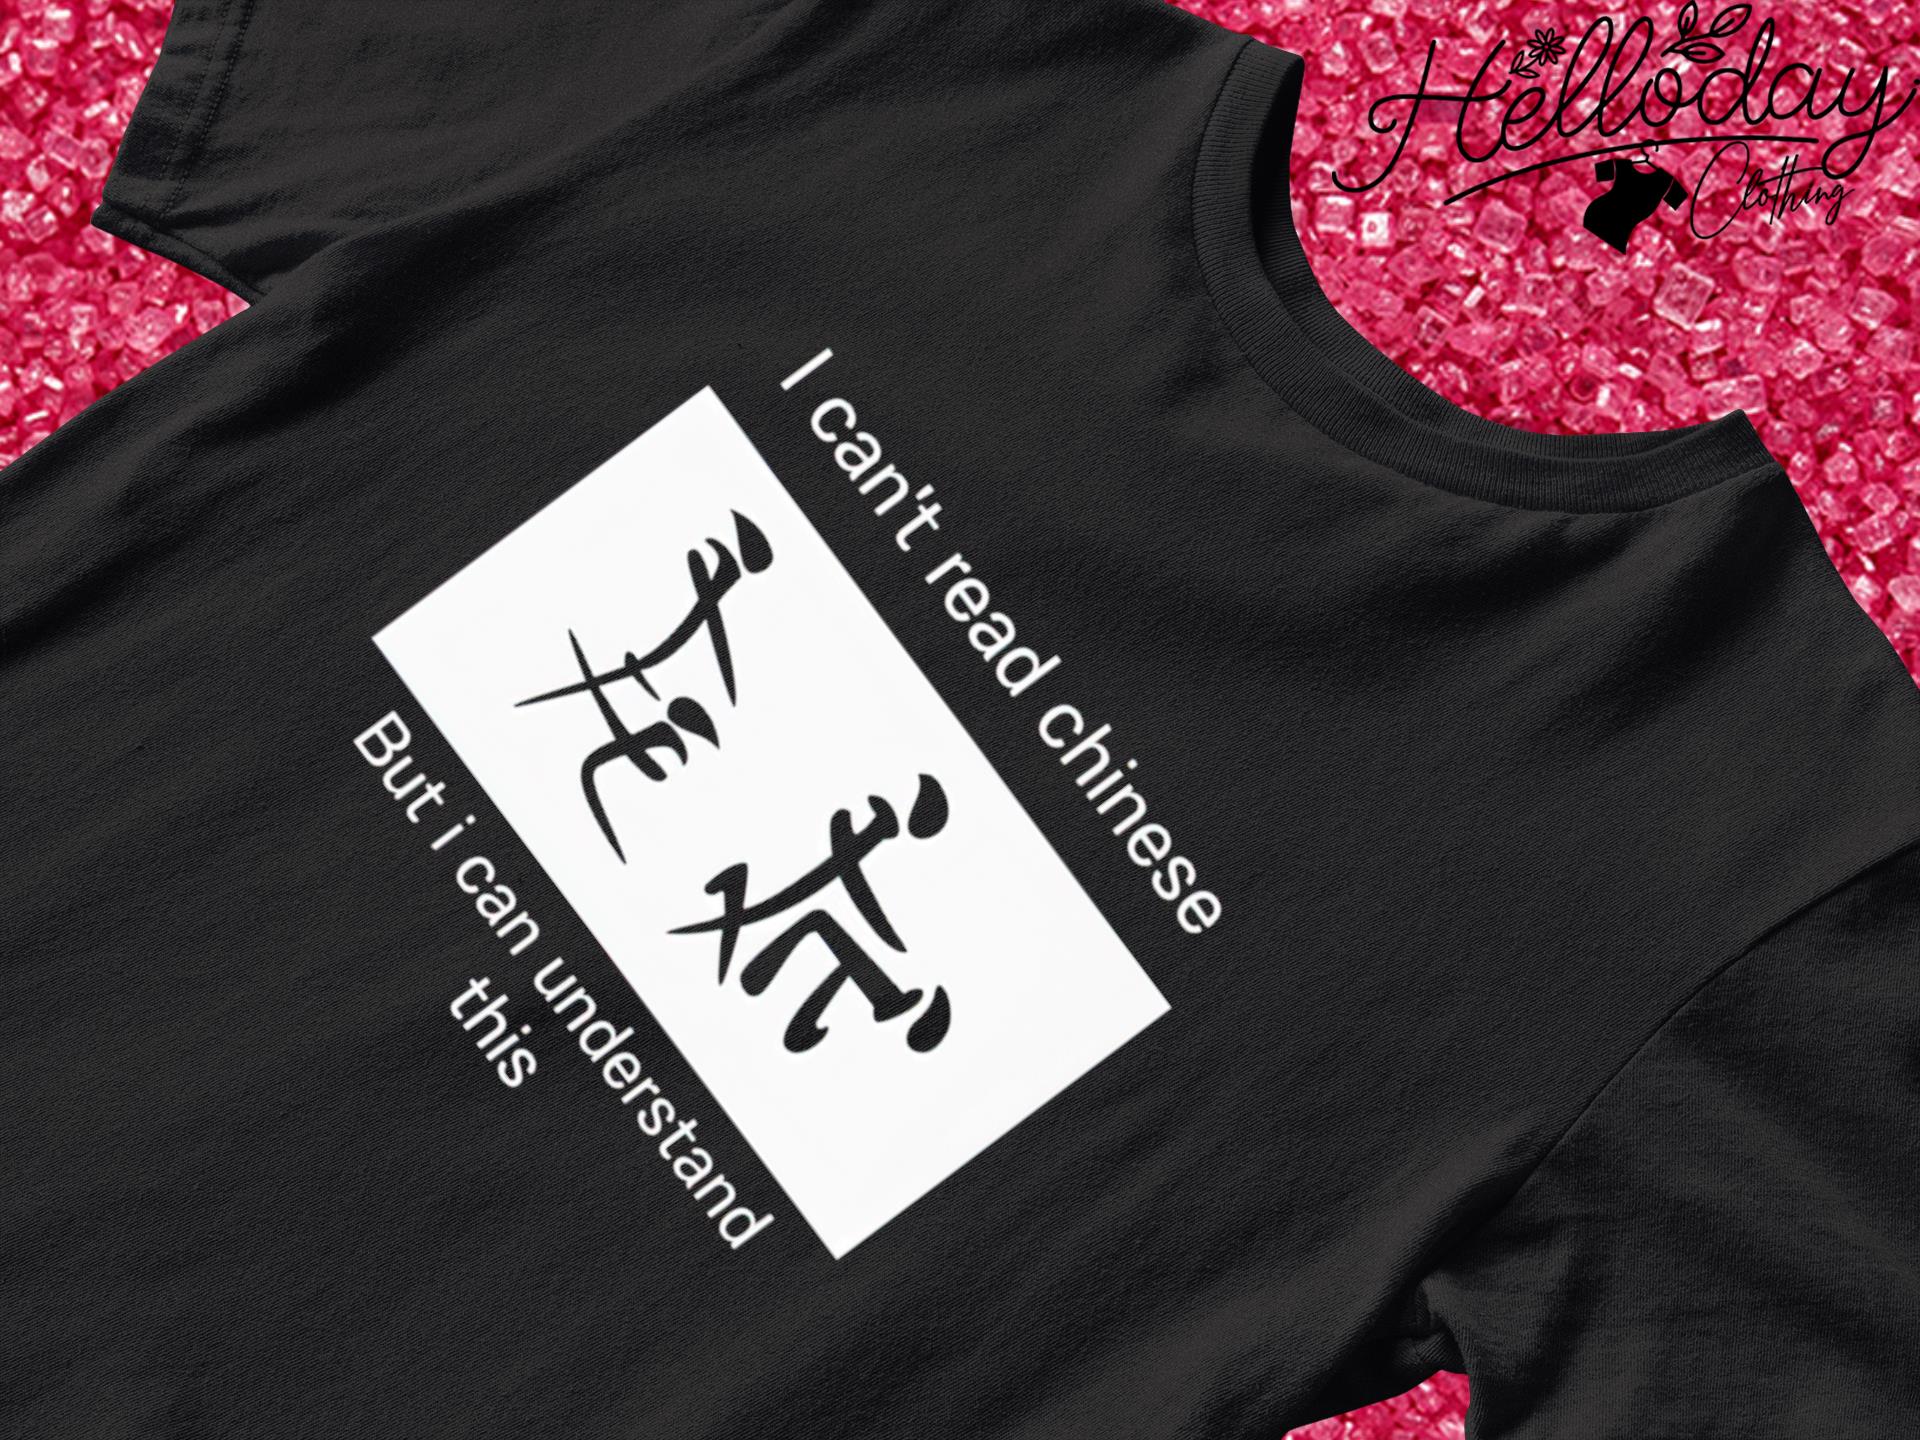 I can't read chinese but I can understand this shirt